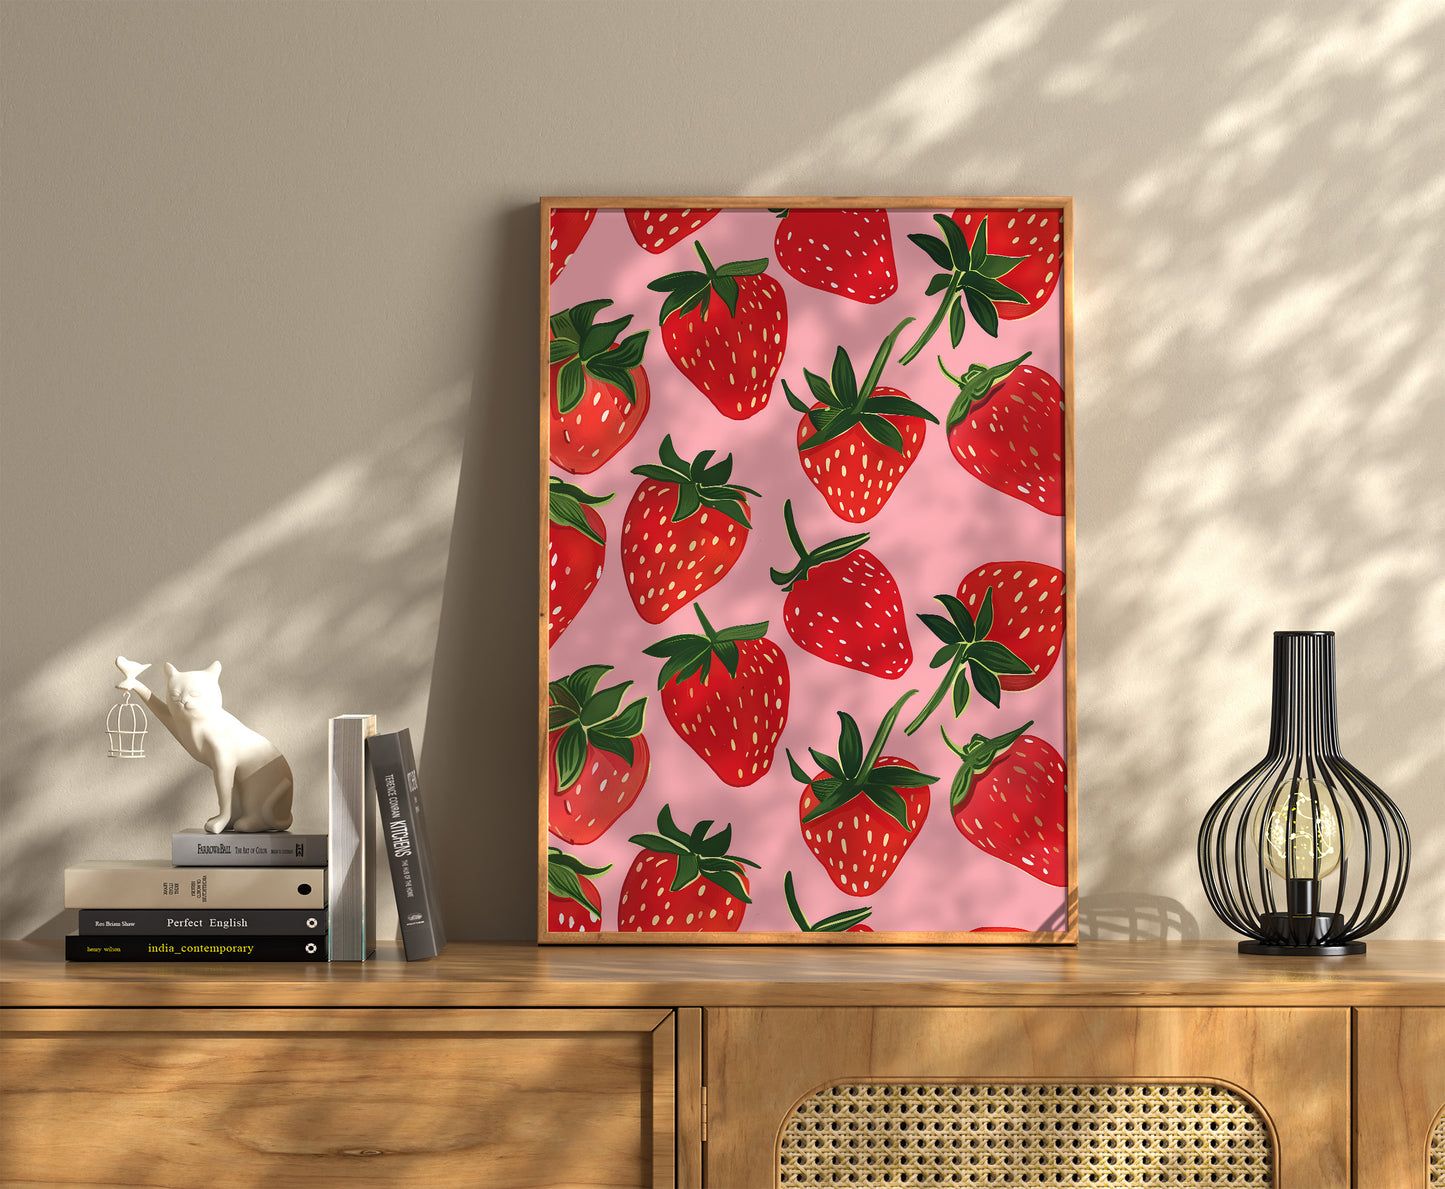 A framed poster of strawberries on a pink background, hanging above a wooden sideboard.